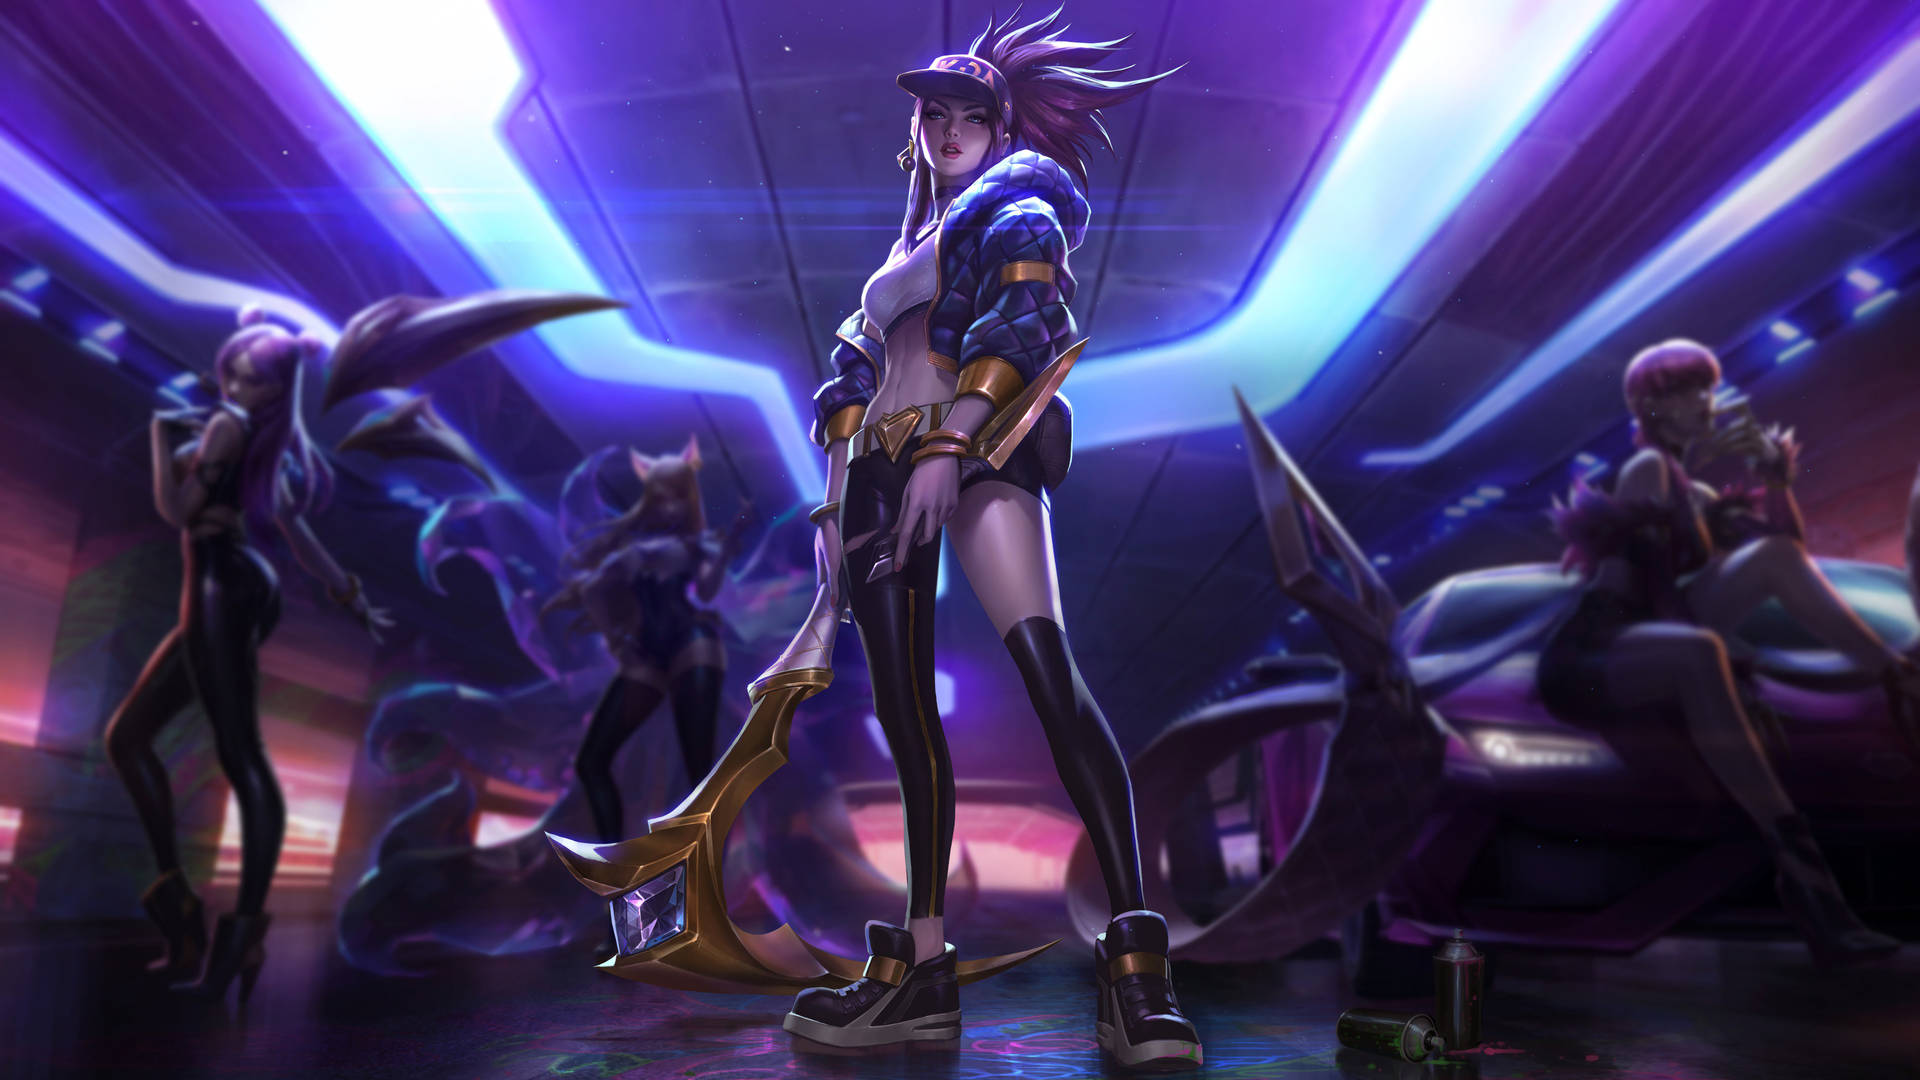 League Of Legends Hero Akali Displayed On A 4k Gaming Smartphone Screen